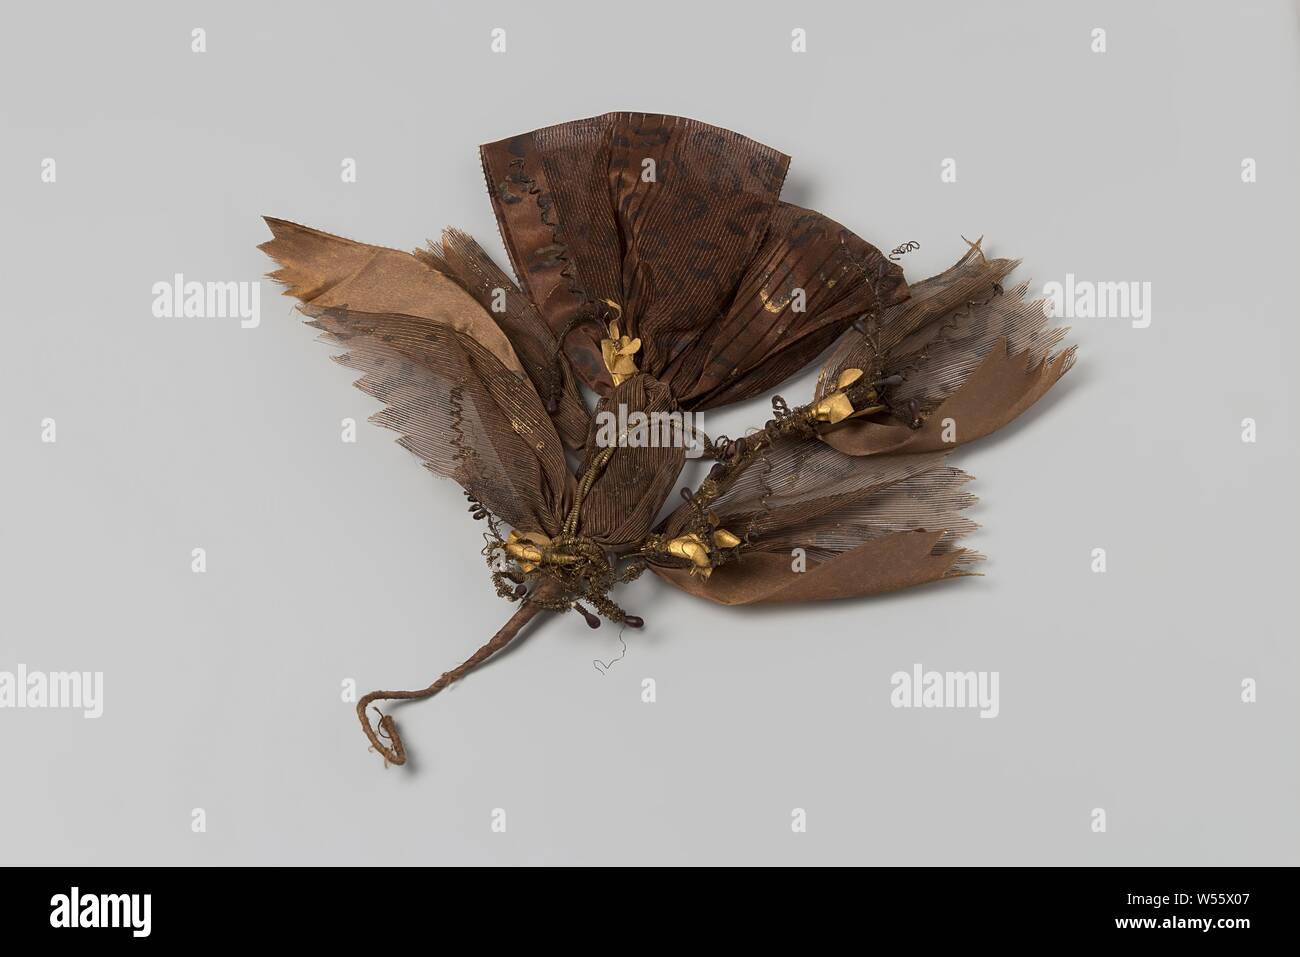 Corsage of brown ribbon with print, brown gauze interlaced with gold thread and gold thread treads, held together with iron wire., anonymous, Netherlands (possibly), c. 1800 - c. 1900, lint, troedel, tak, h 15 cm × w 17 cm × d 4.5 cm Stock Photo